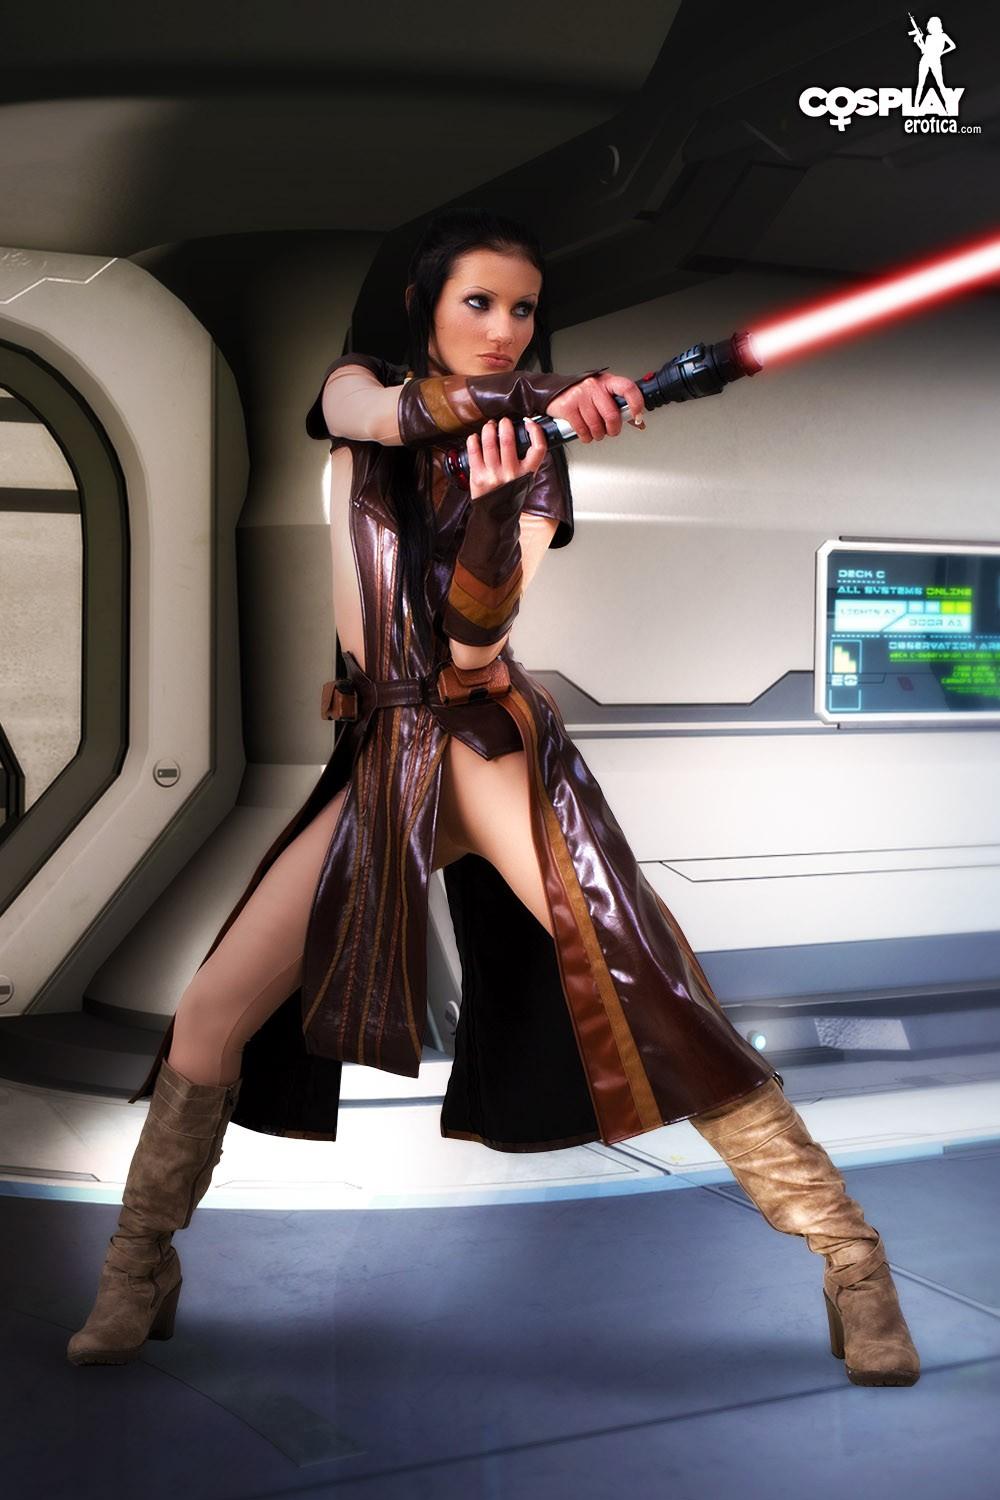 Beautiful cosplay girl Zorah shows how she can handle a light saber #60211126